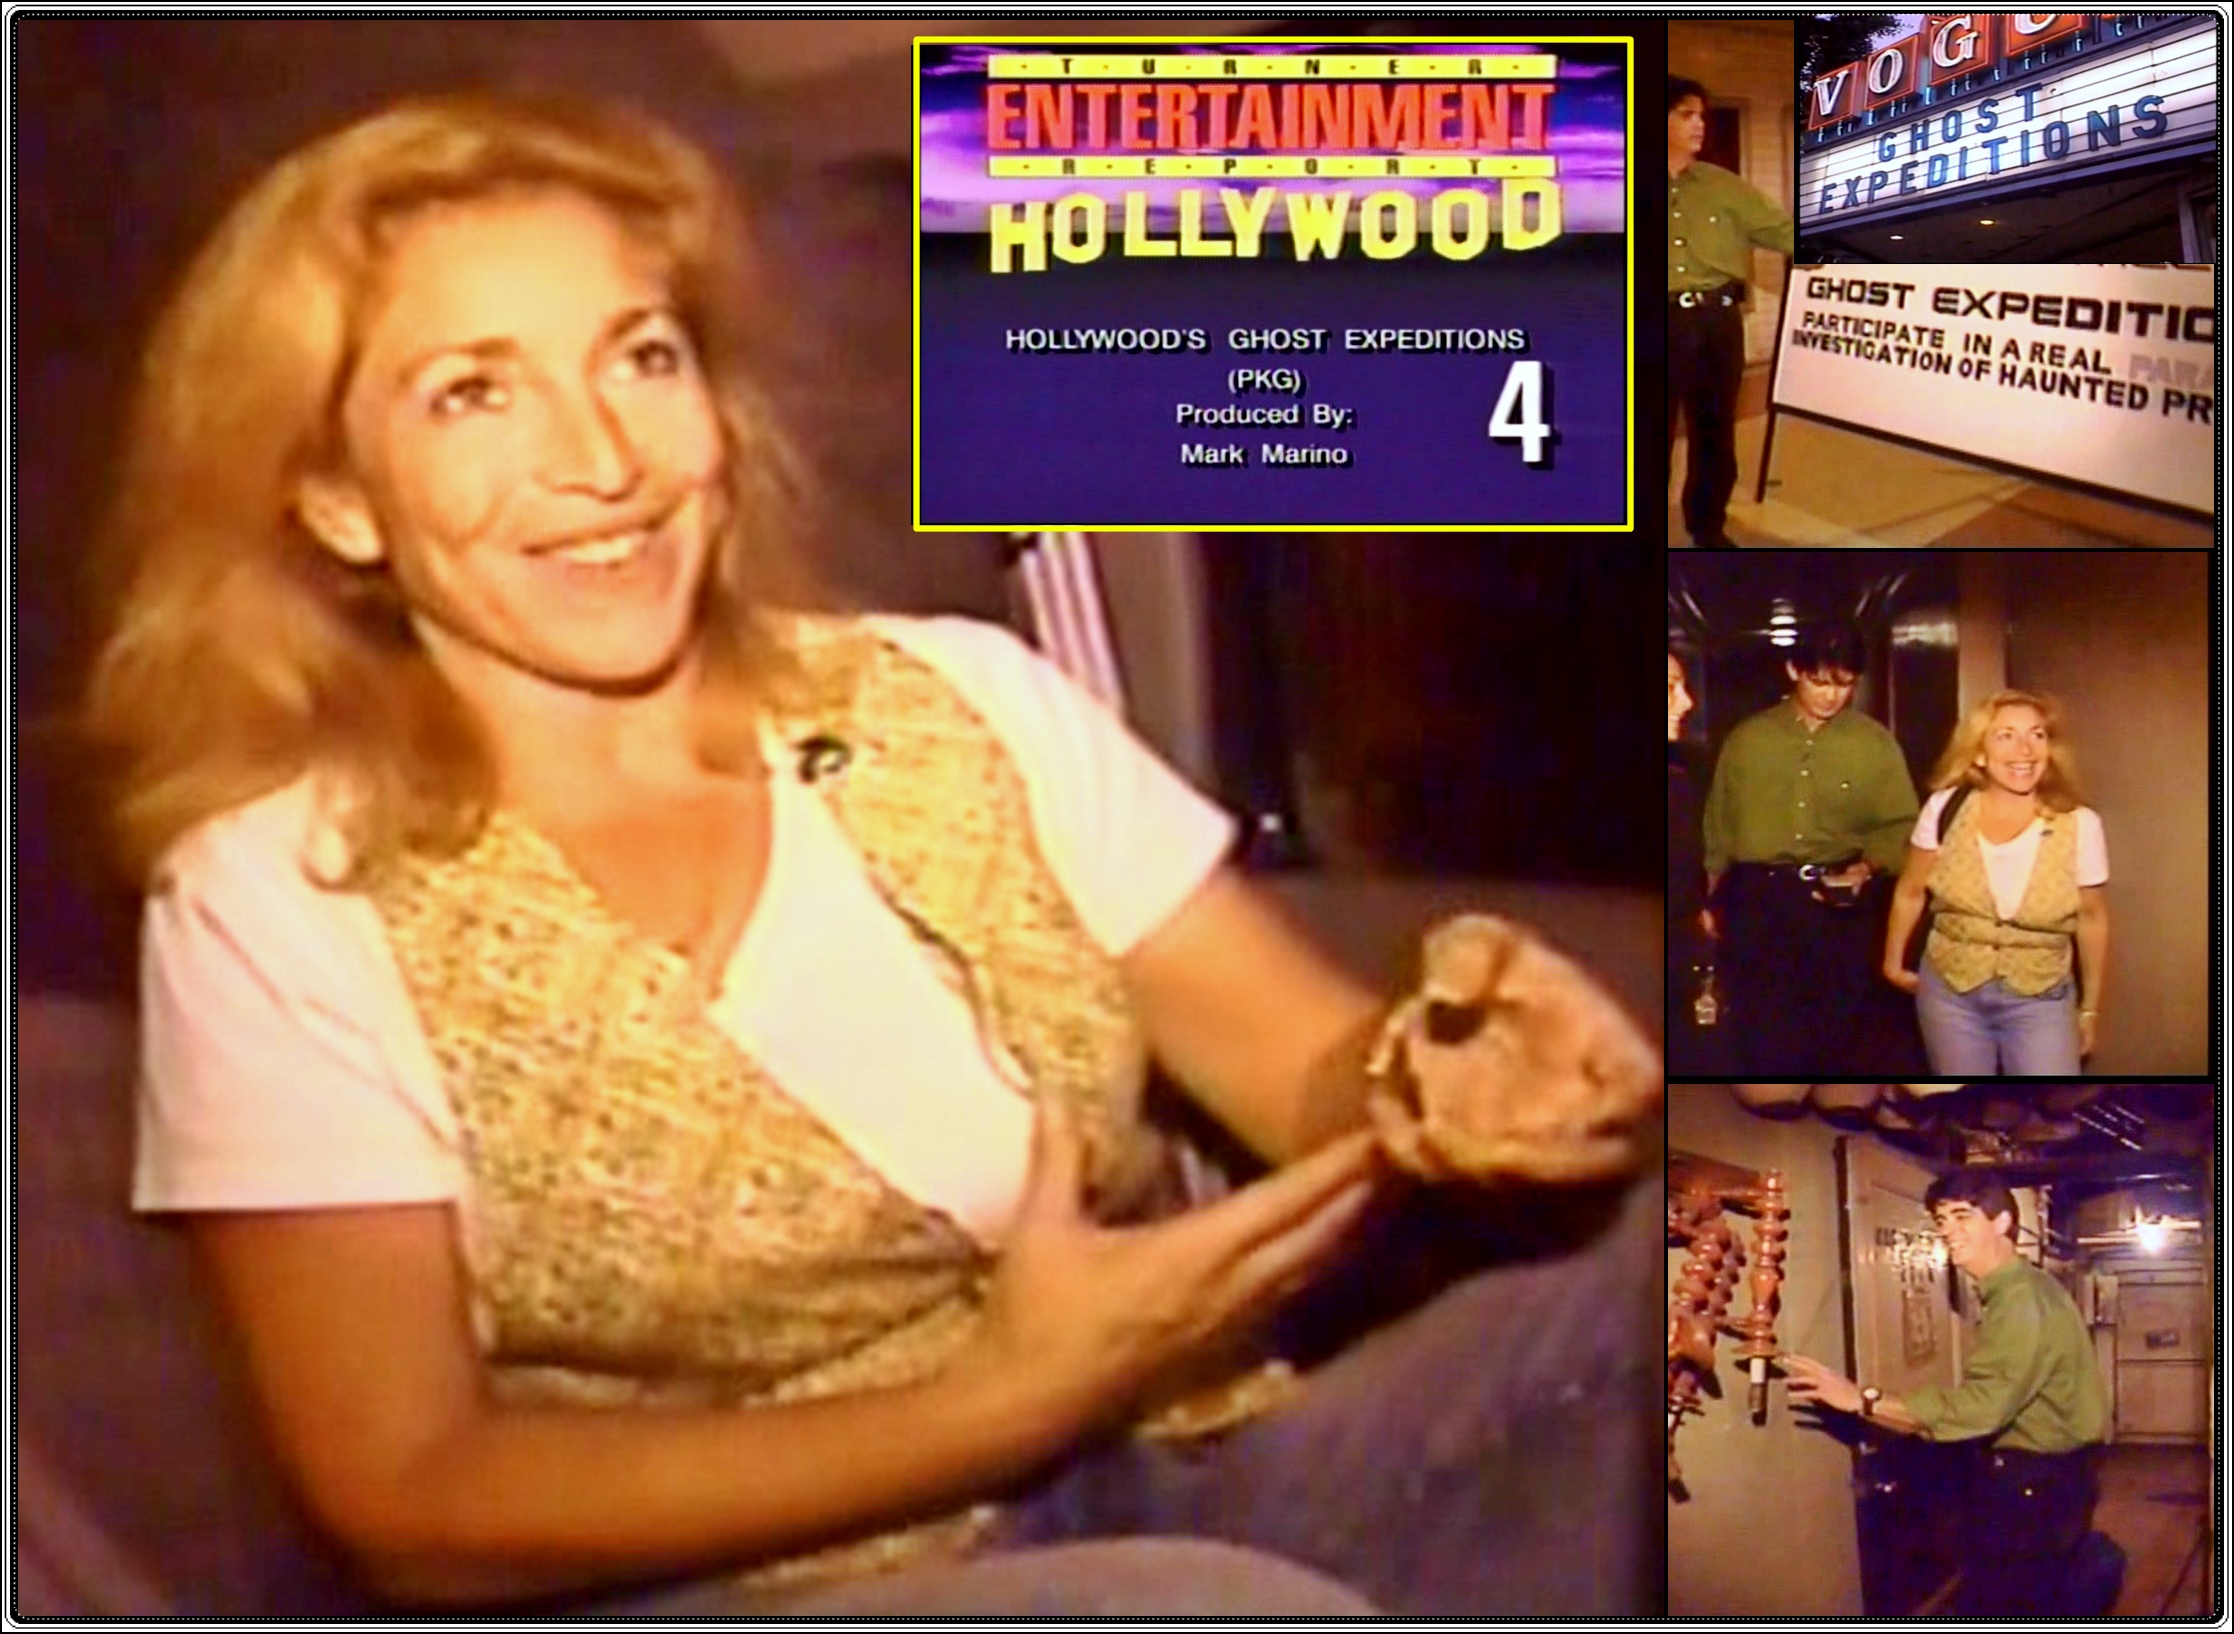 Daena Smoller on a Turner Entertainment Report: HOLLYWOOD'S GHOST EXPEDITIONS, with Mark Marino (1997).